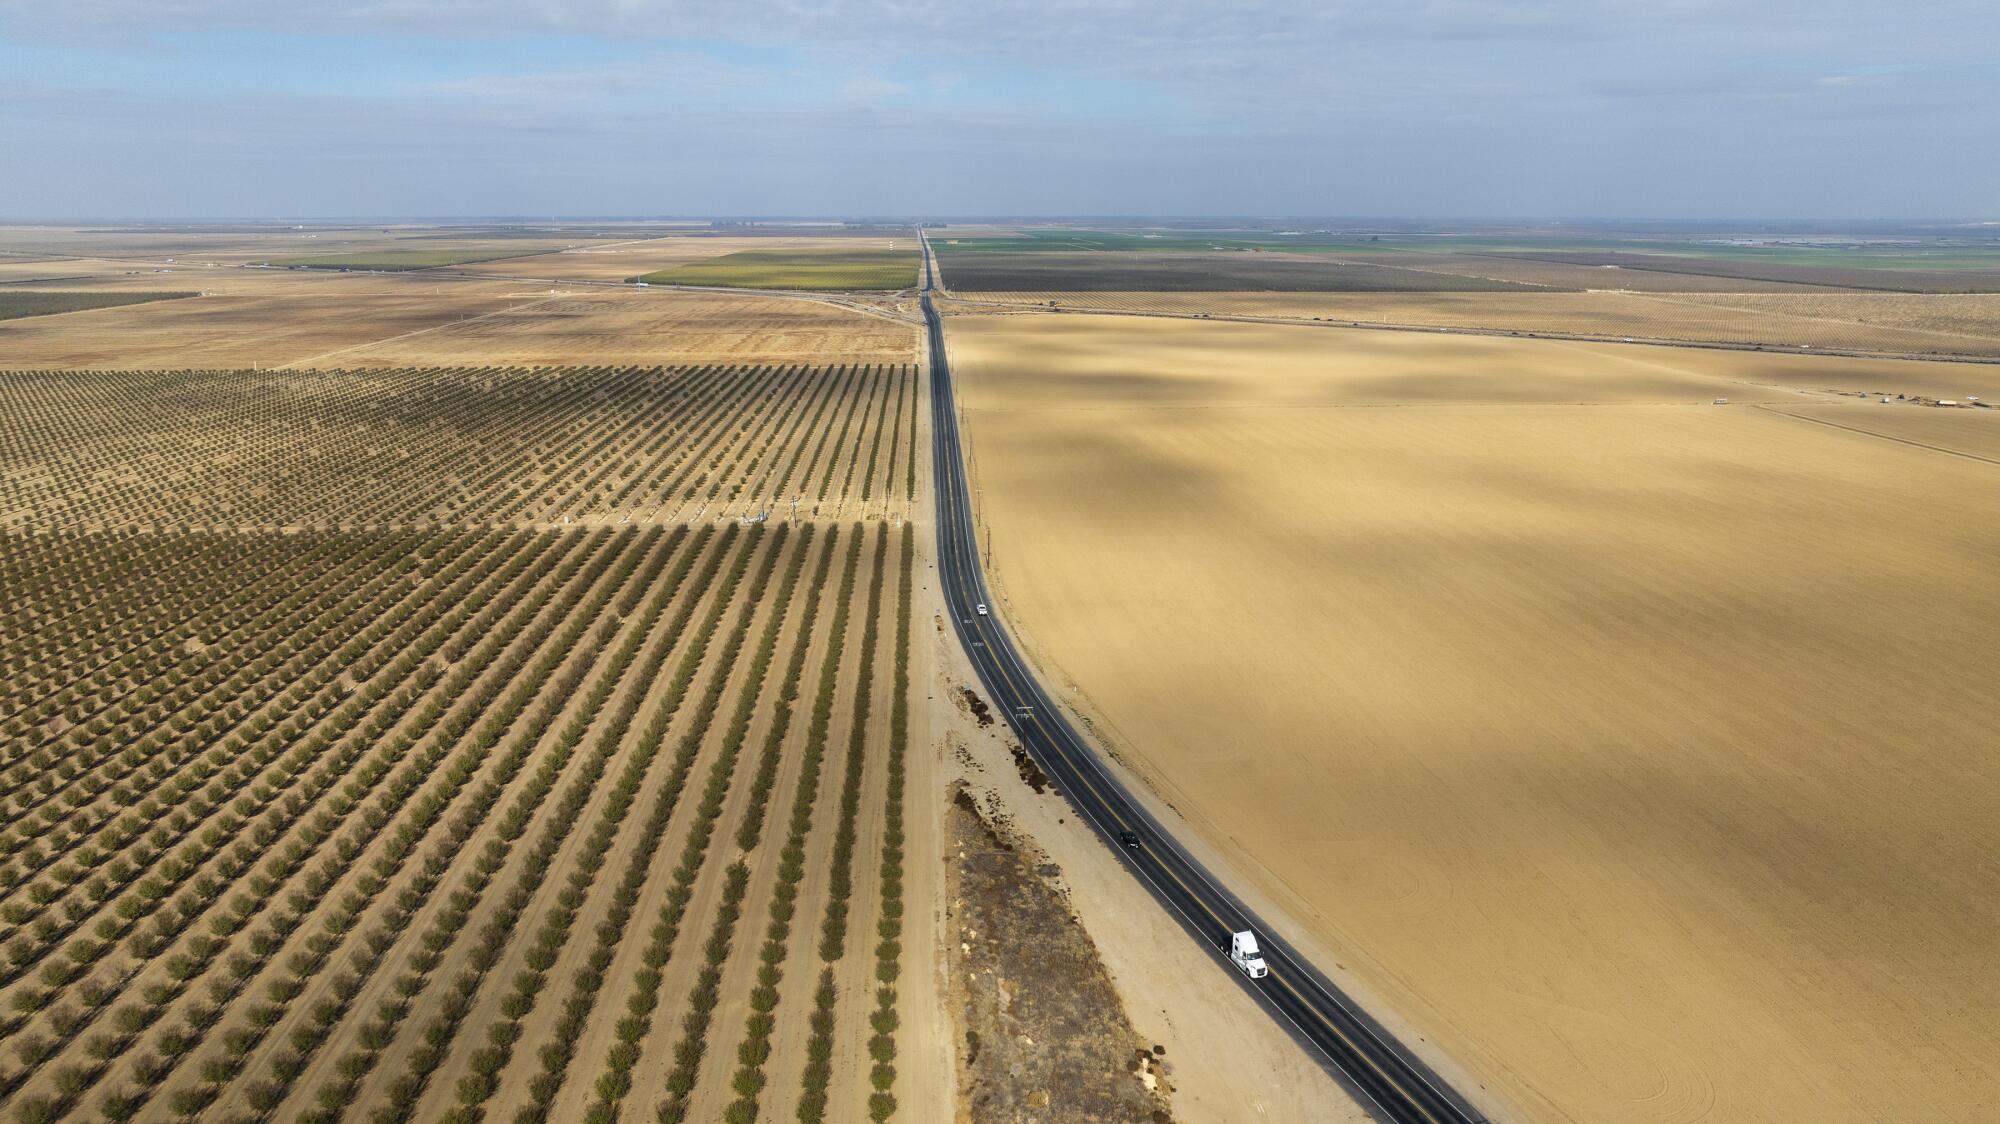 An aerial view of farmland and almond orchards crossed by a road.